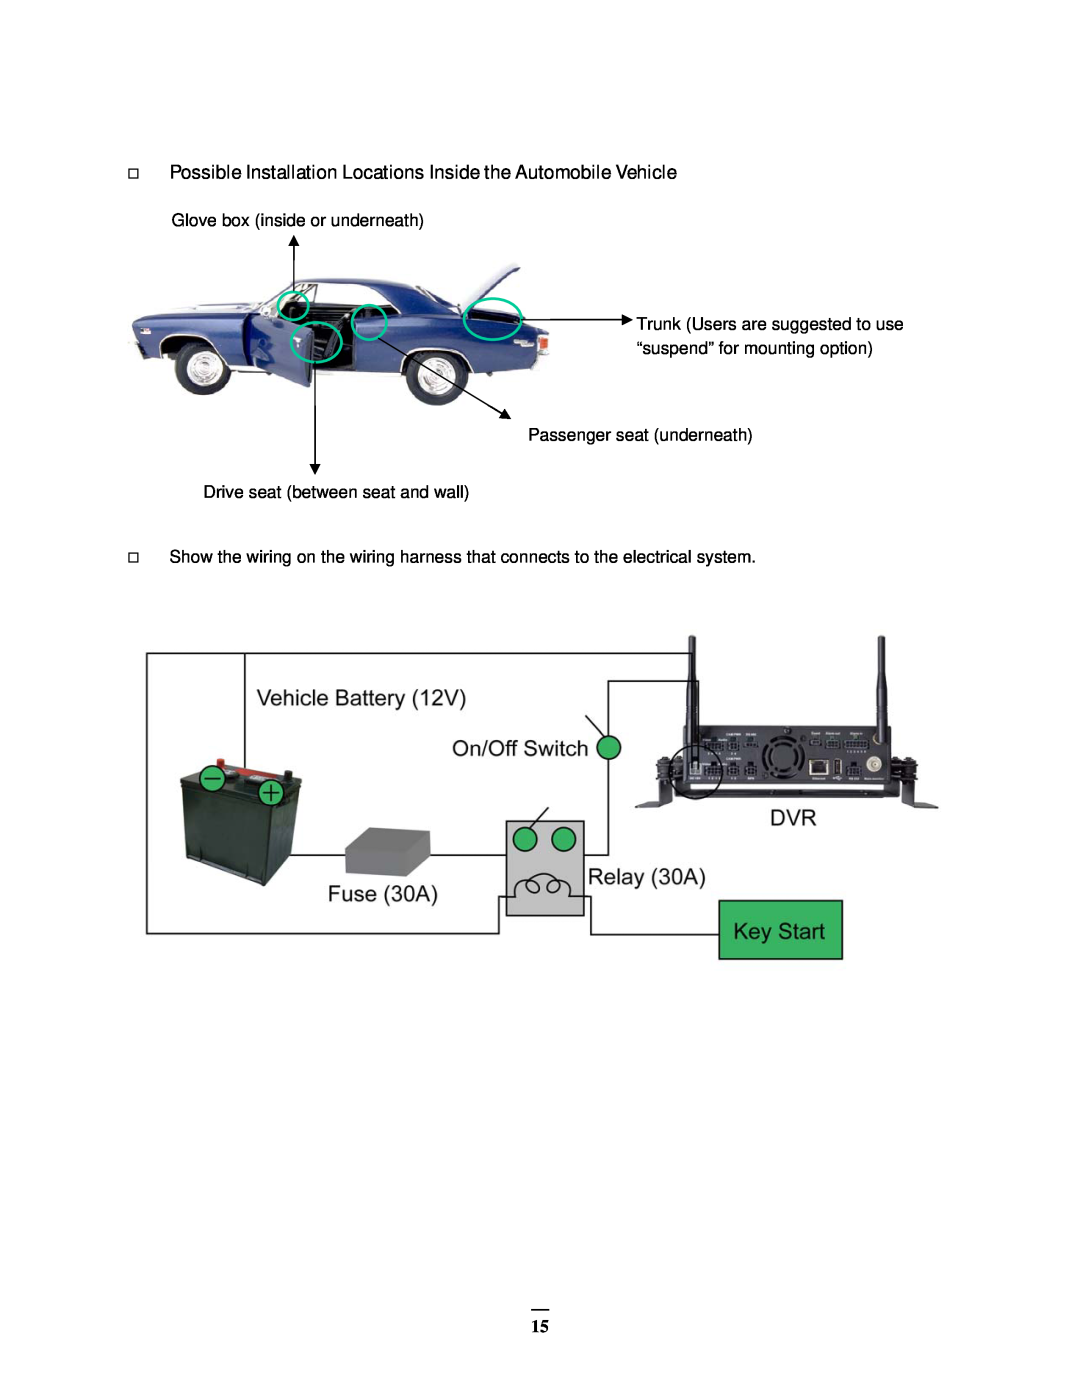 EverFocus EMV400 user manual Trunk Users are suggested to use “suspend” for mounting option 